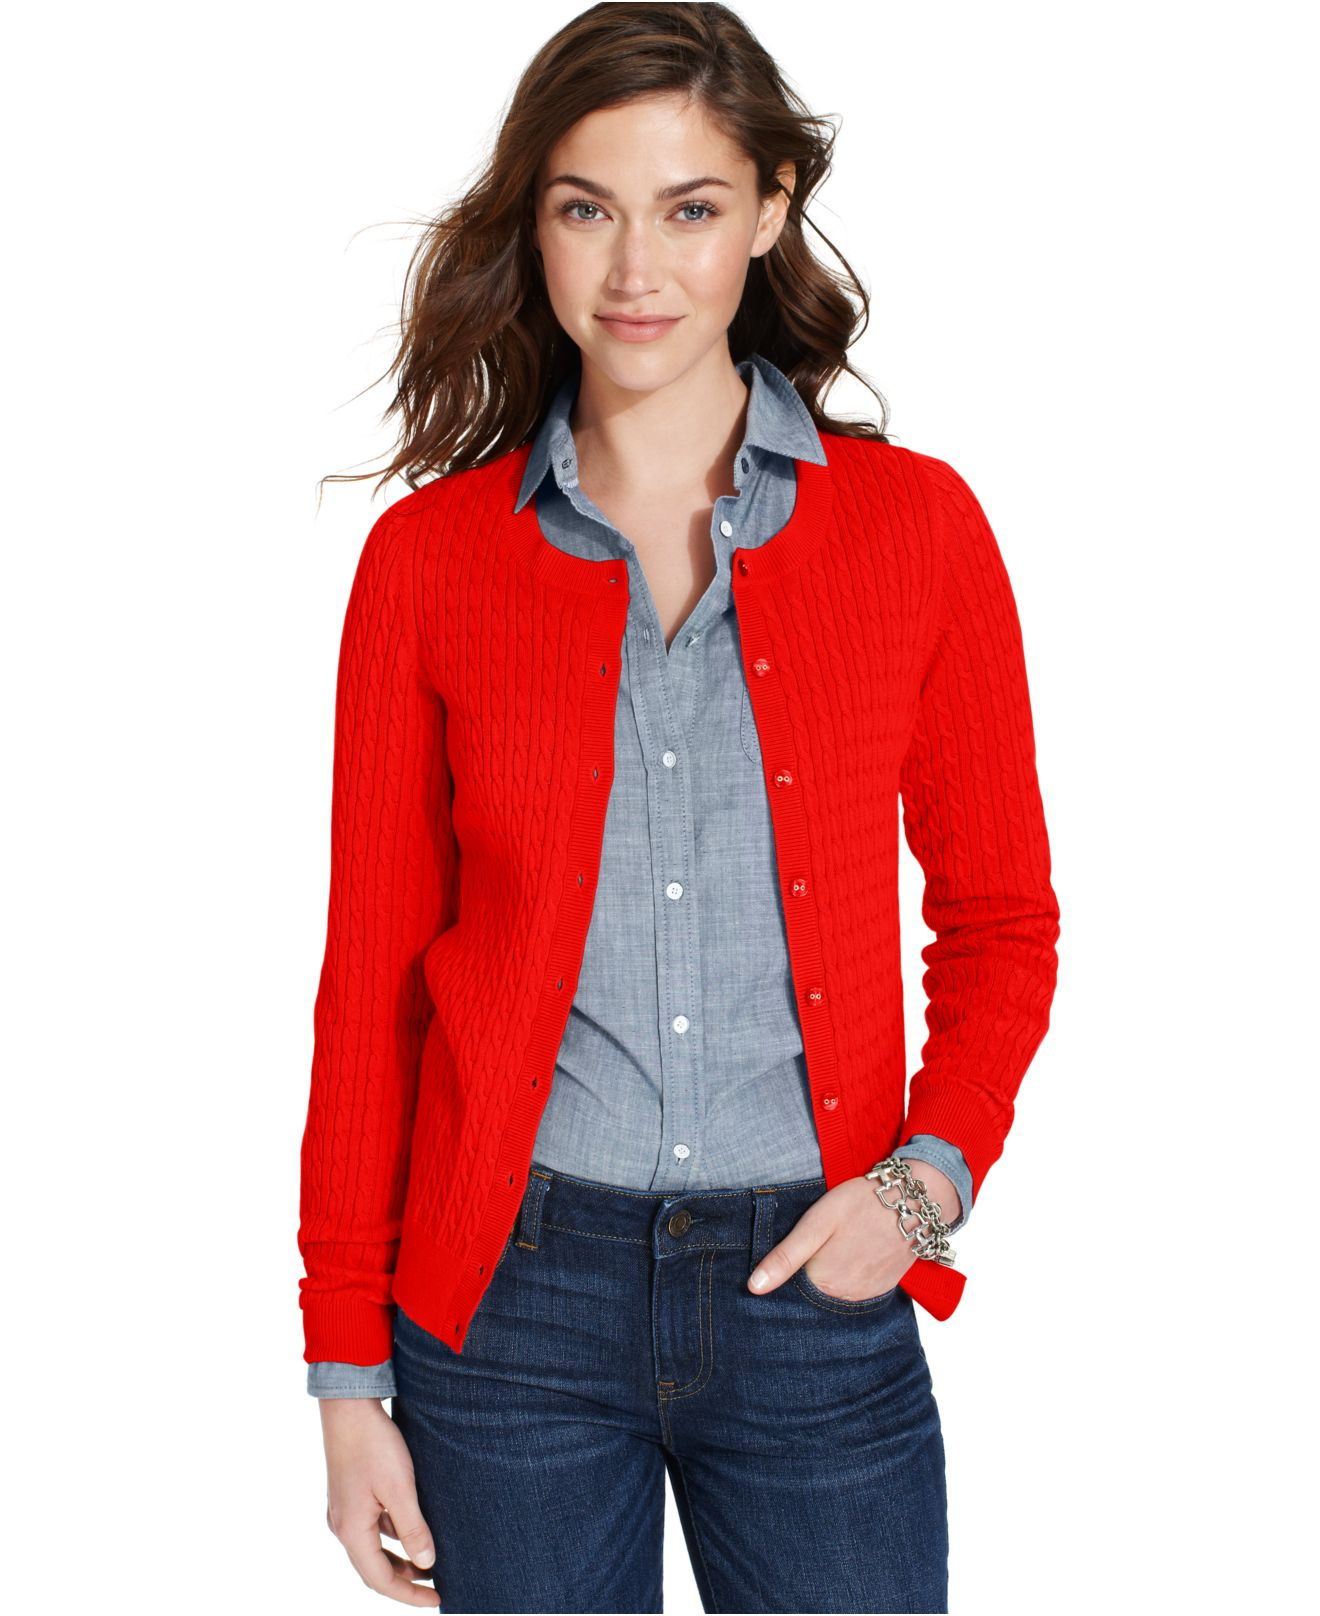 Lyst - Tommy Hilfiger Long-Sleeve Cable-Knit Cardigan in Red